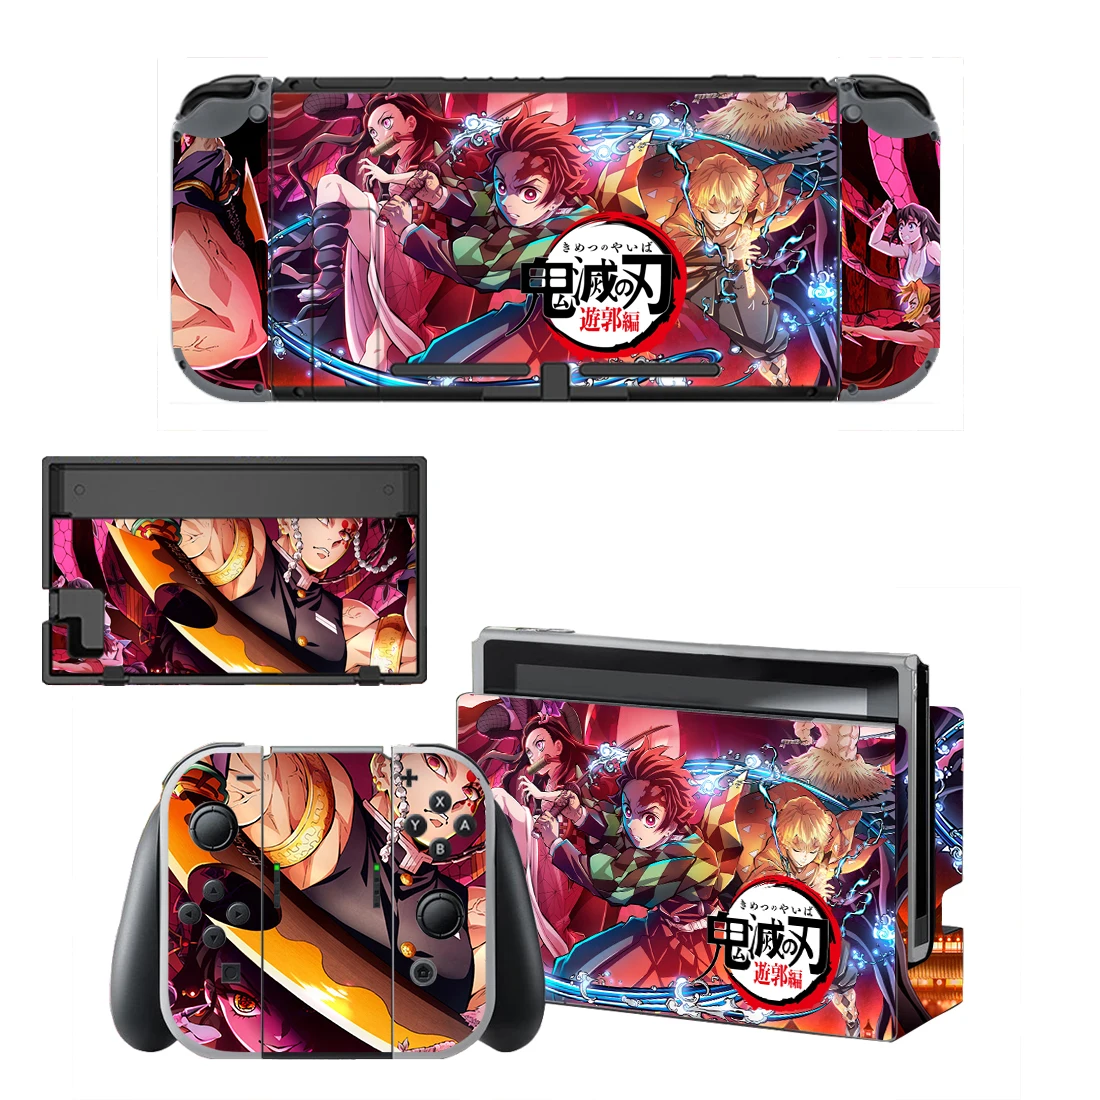 Vinyl Screen Skin Anime Demon Slayer Protector Stickers for Nintendo Switch NS Console + Controller + Stand Holder Dock Skins